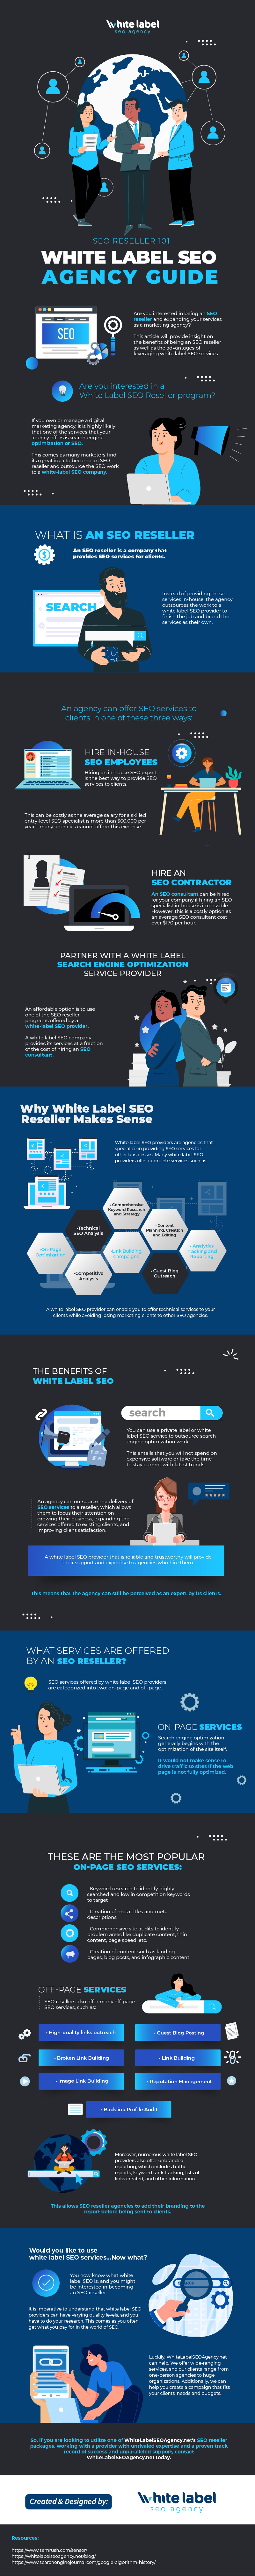 White Label SEO Agency Guide